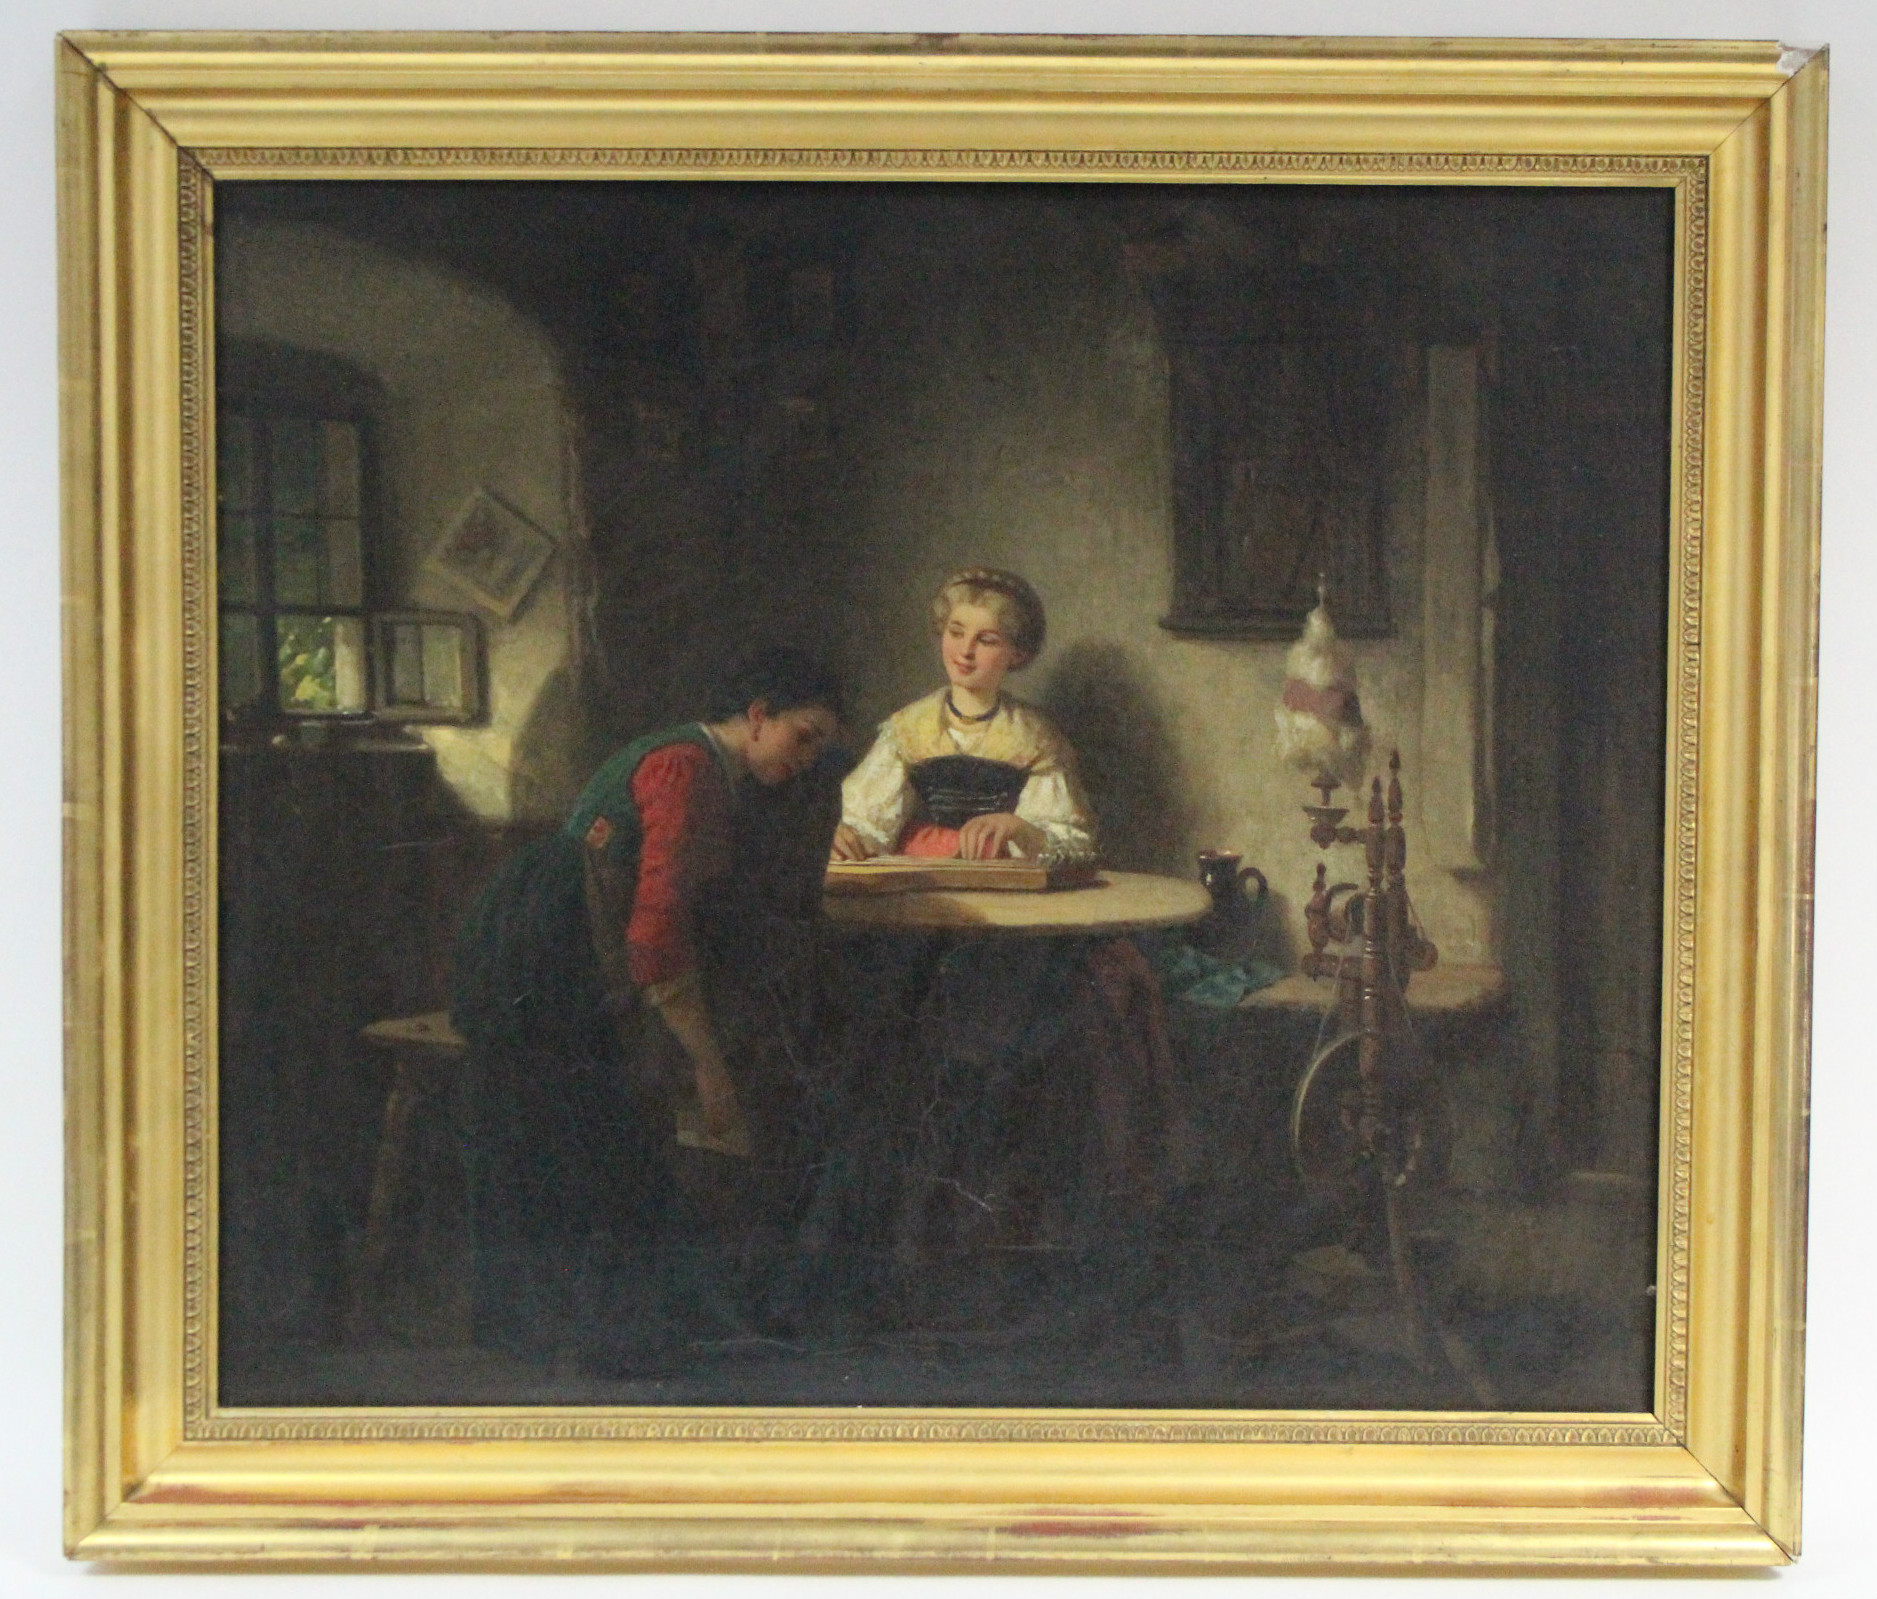 ENGLISH SCHOOL, 19th century. A room interior with two ladies seated at a table beside a spinning